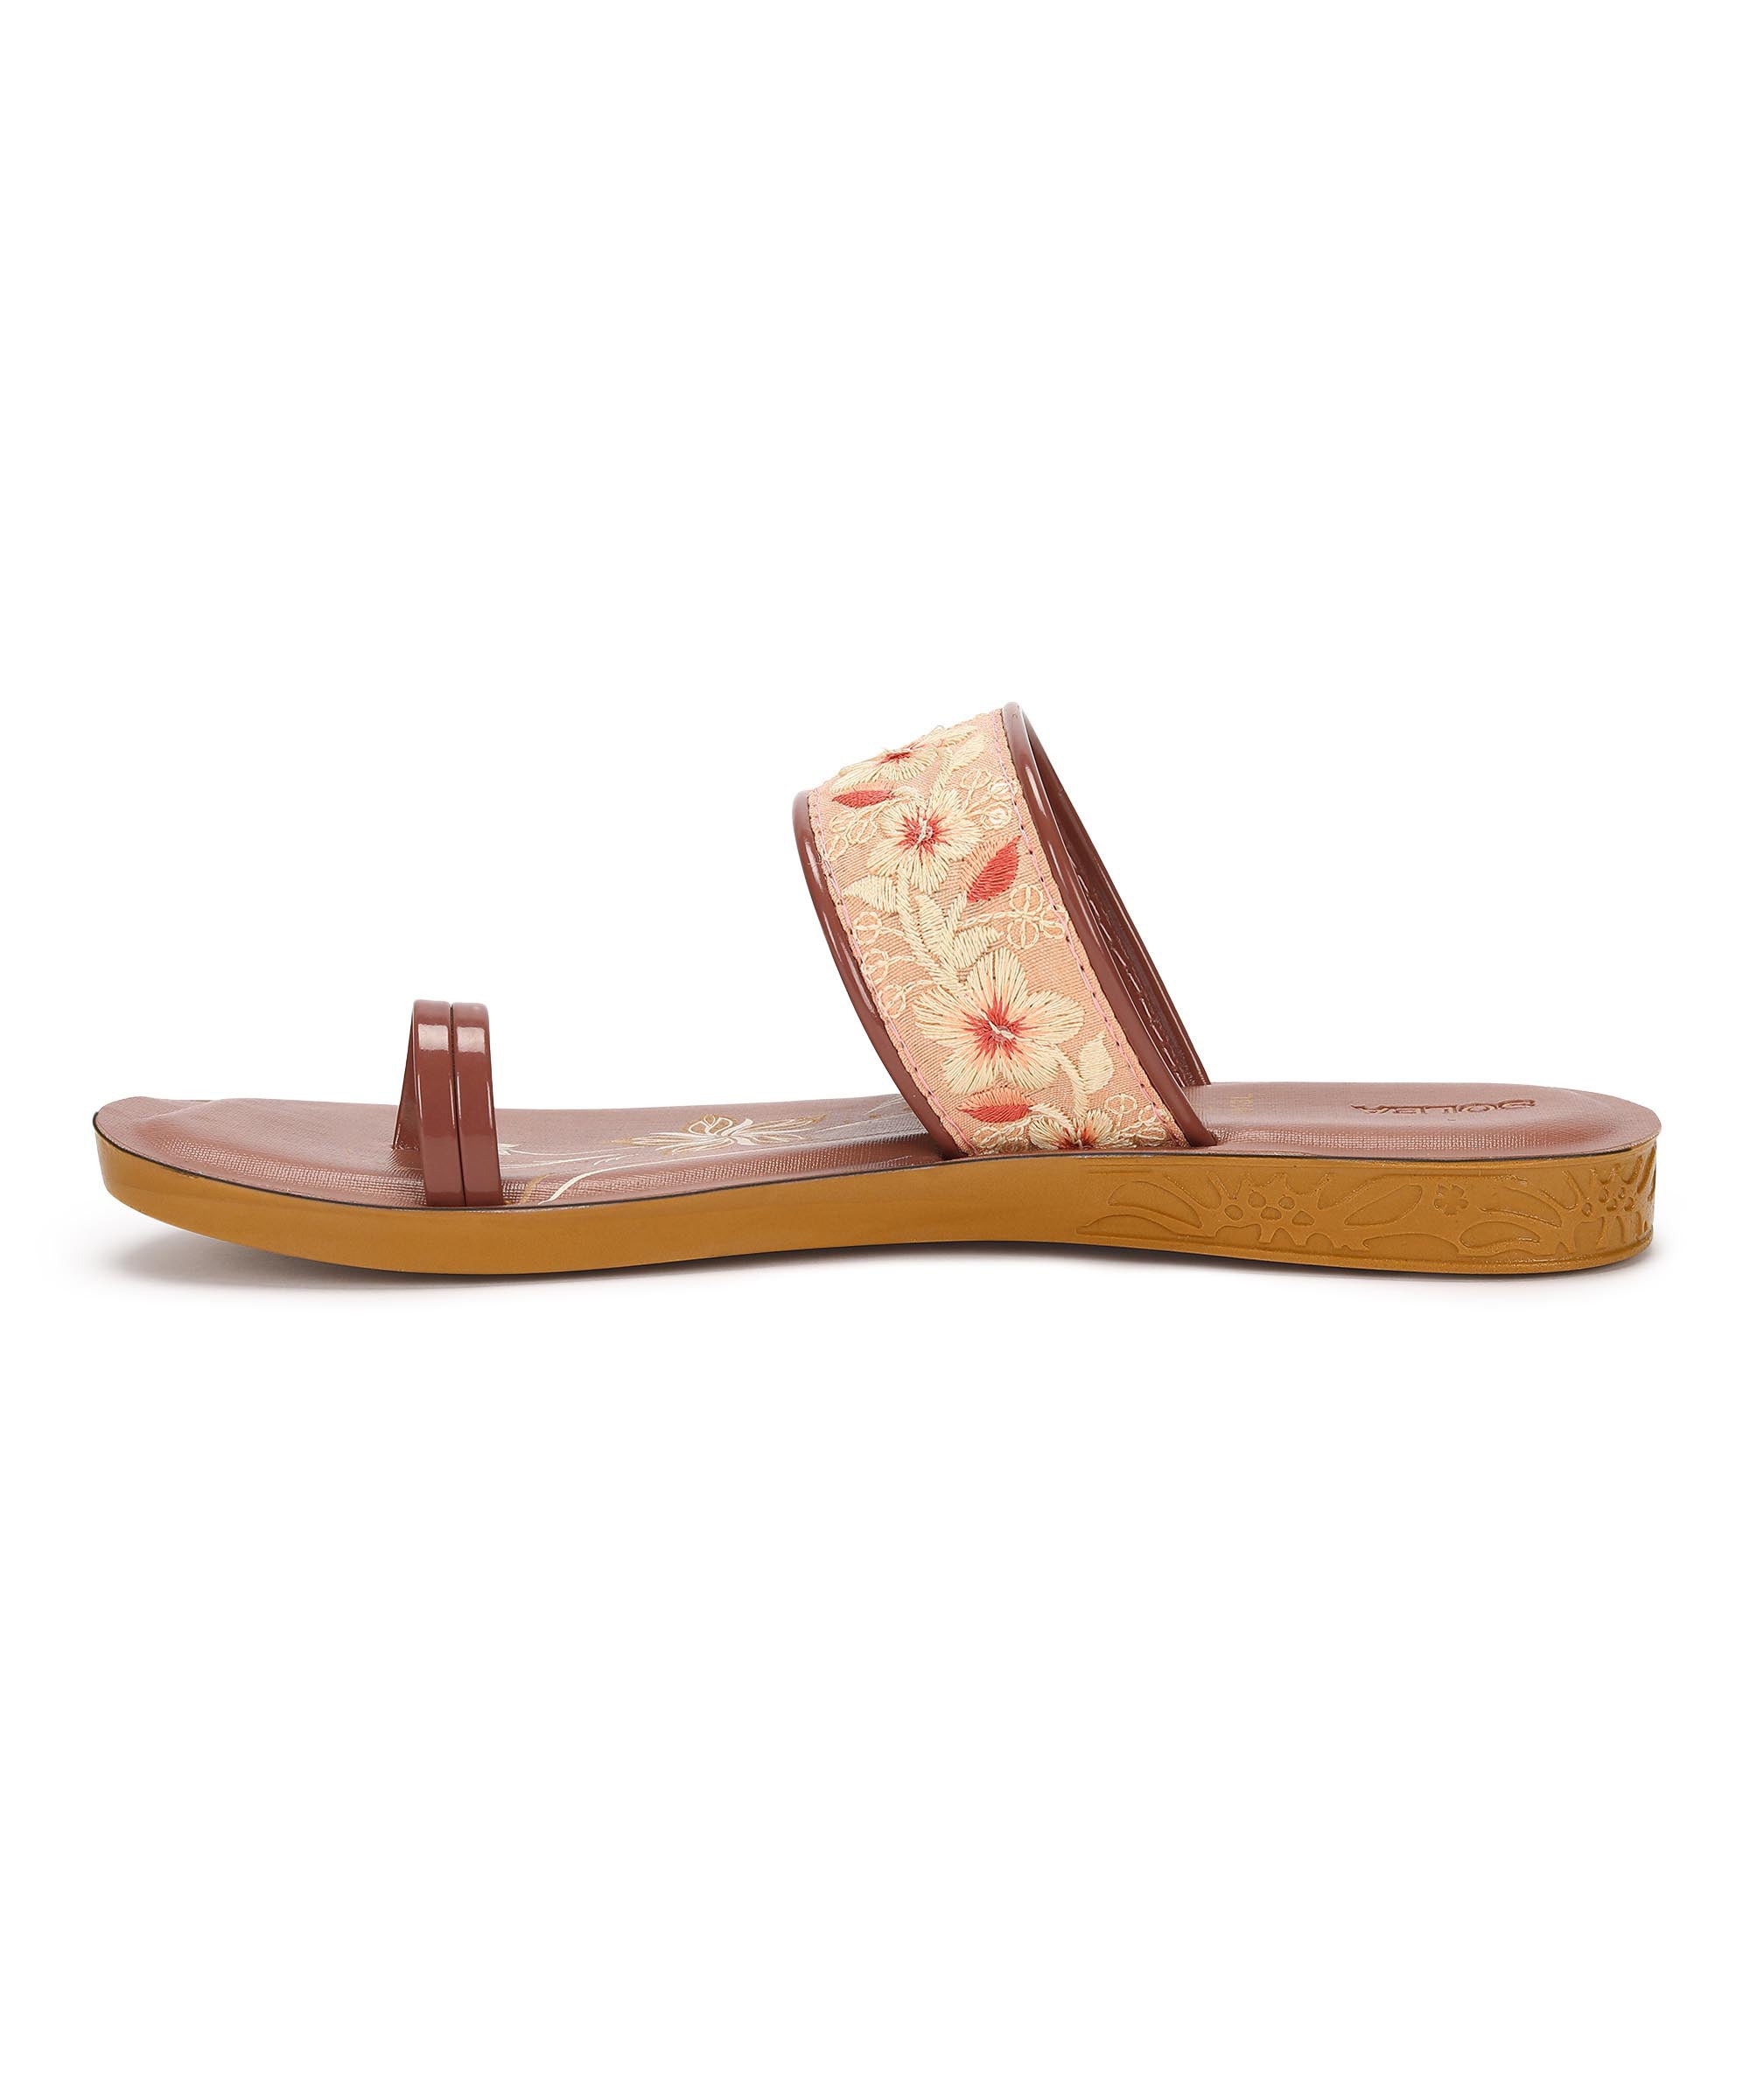 Paragon PUK7013L Women Sandals | Casual &amp; Formal Sandals | Stylish, Comfortable &amp; Durable | For Daily &amp; Occasion Wear